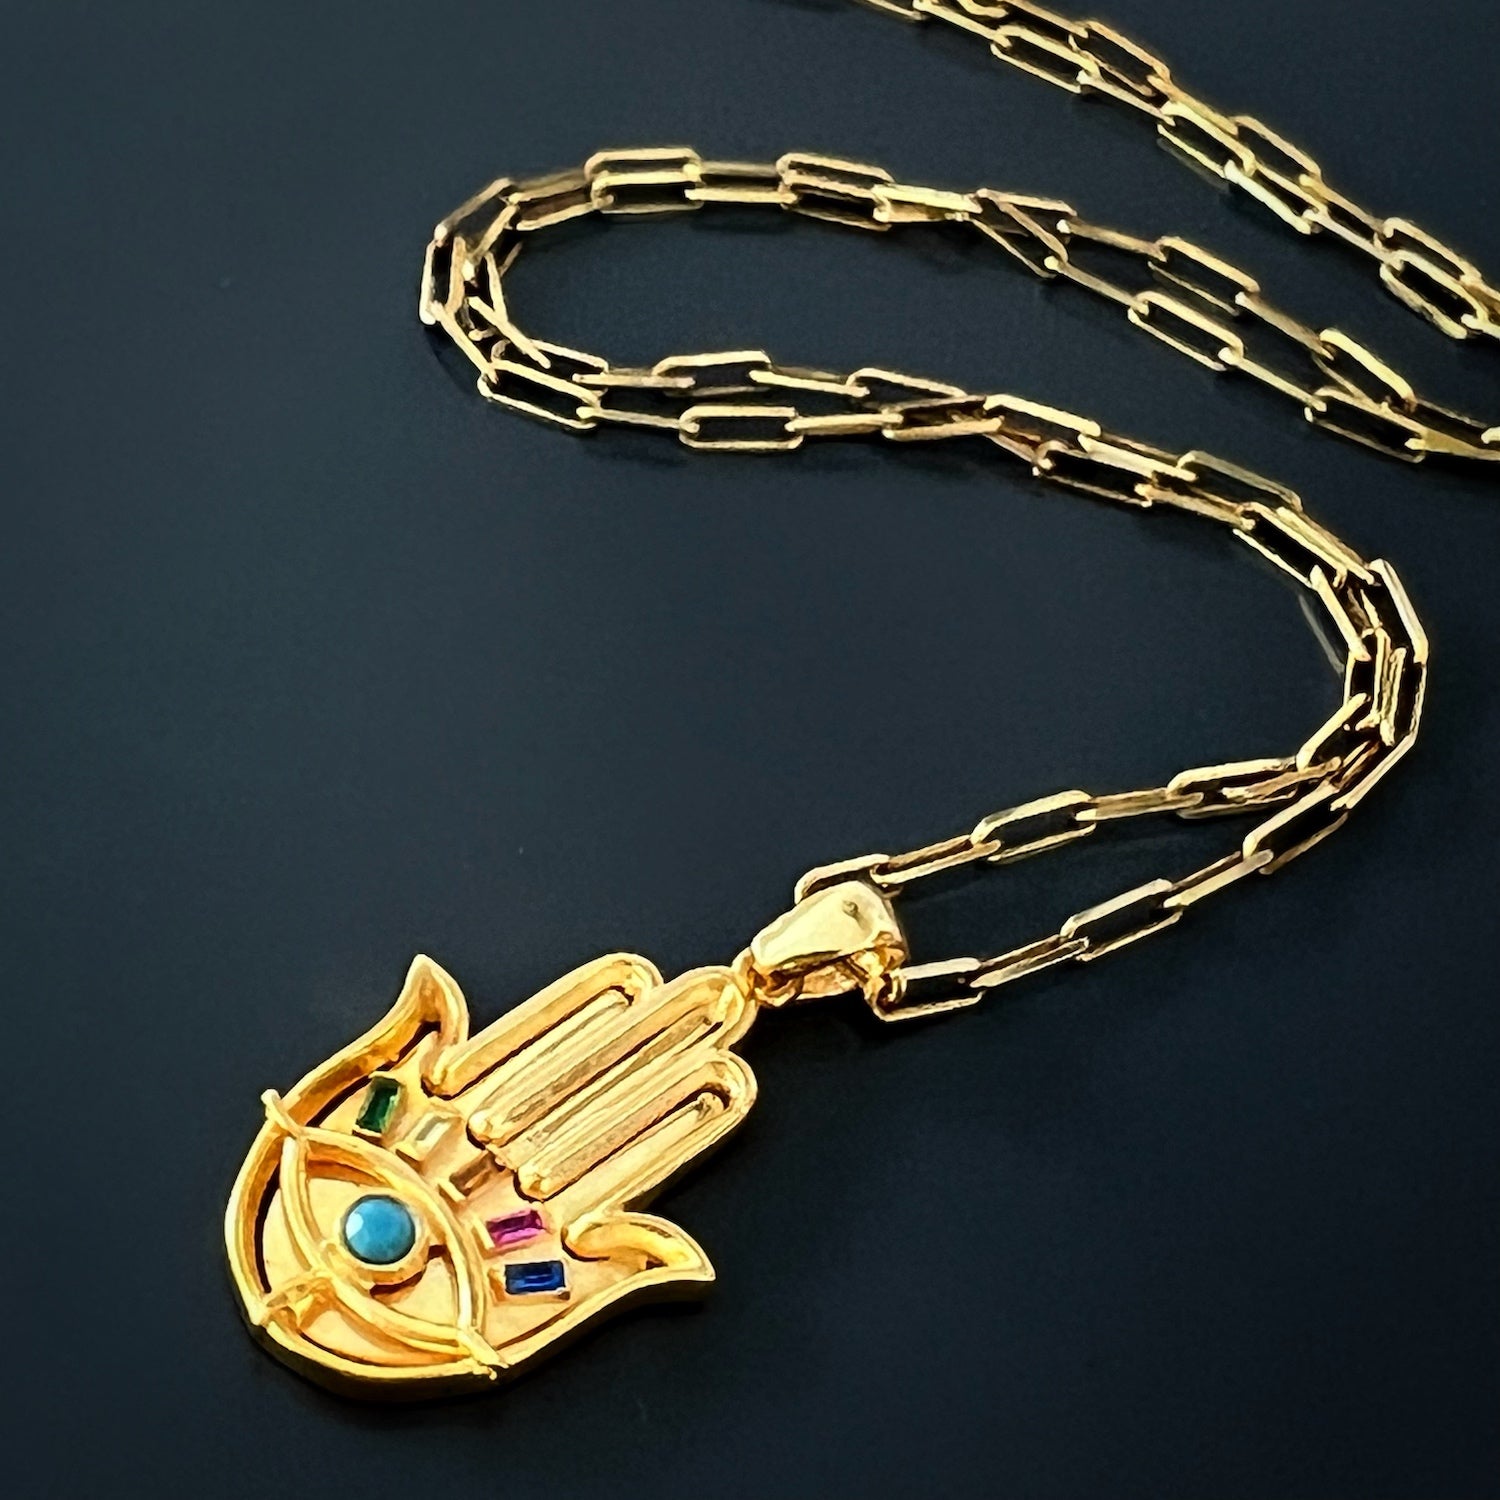 Gold Hamsa Pendant Necklace - Embrace the protective energy of this gold Hamsa pendant necklace, complete with a vibrant turquoise stone and shimmering zircon accents.